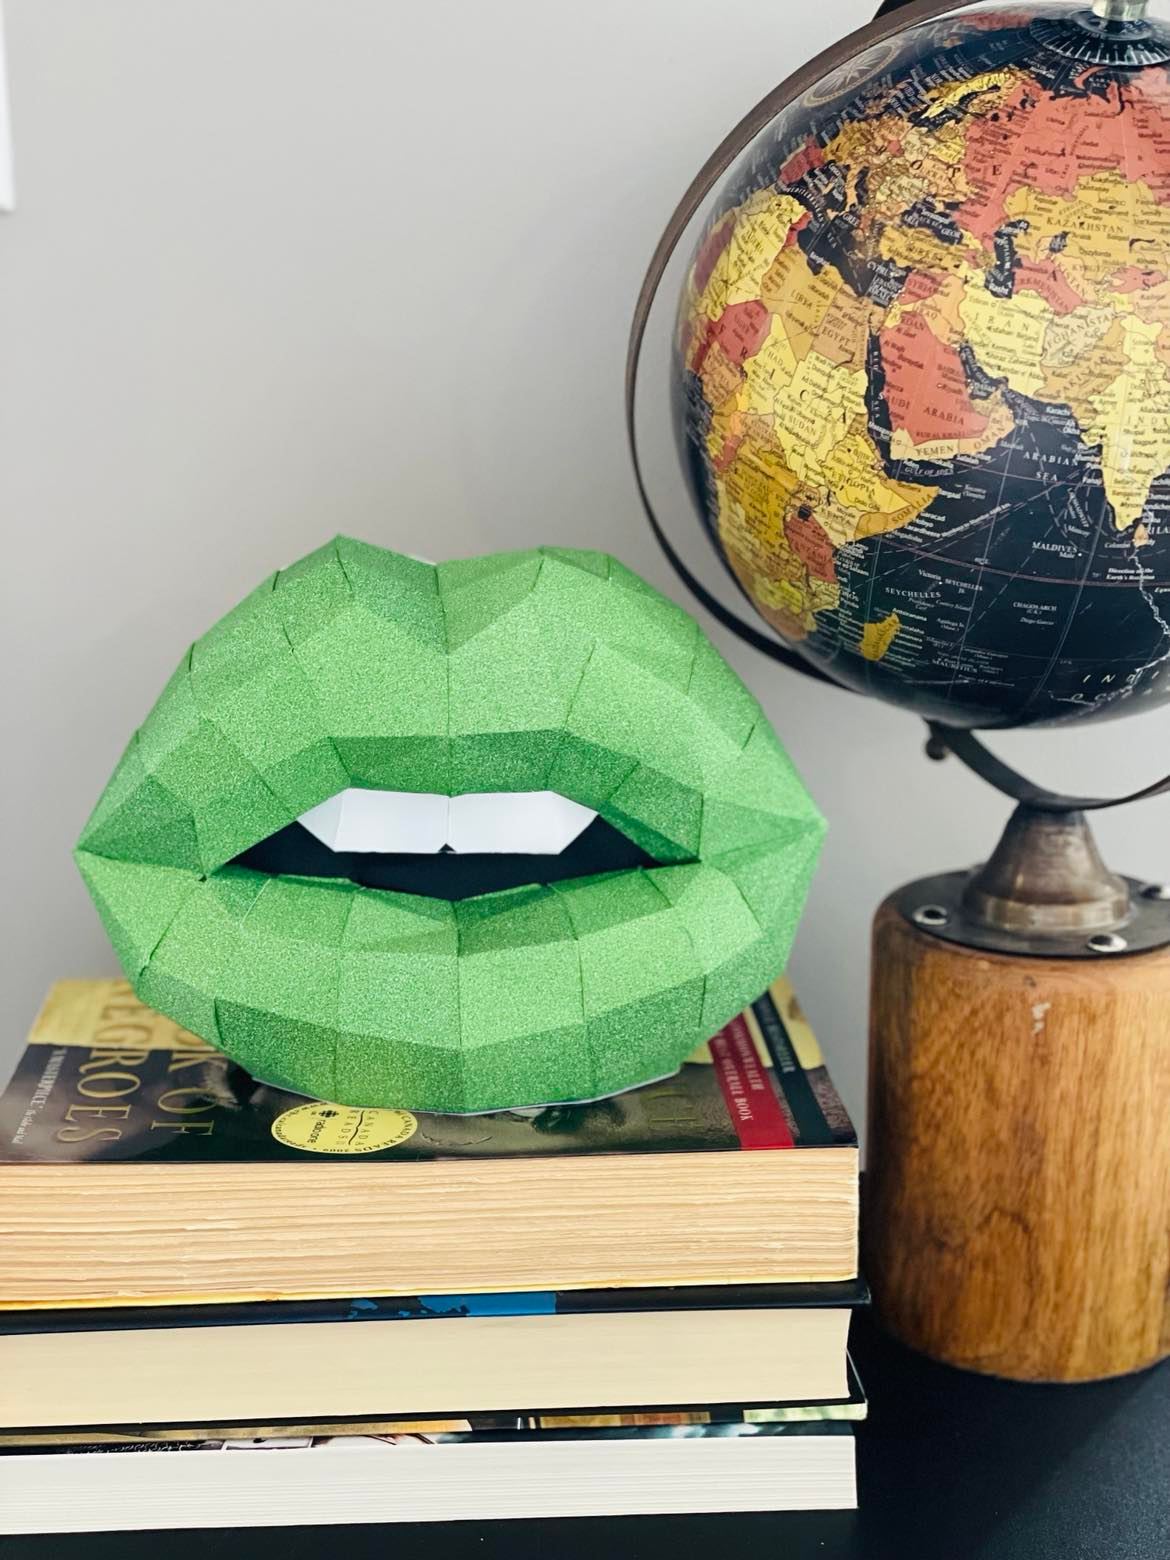 Mini sitting Lip with  Art for Home Office or Salon |  Fashion Lover | Gift for Makeup Artist - Pucker Up Lips and Accessories